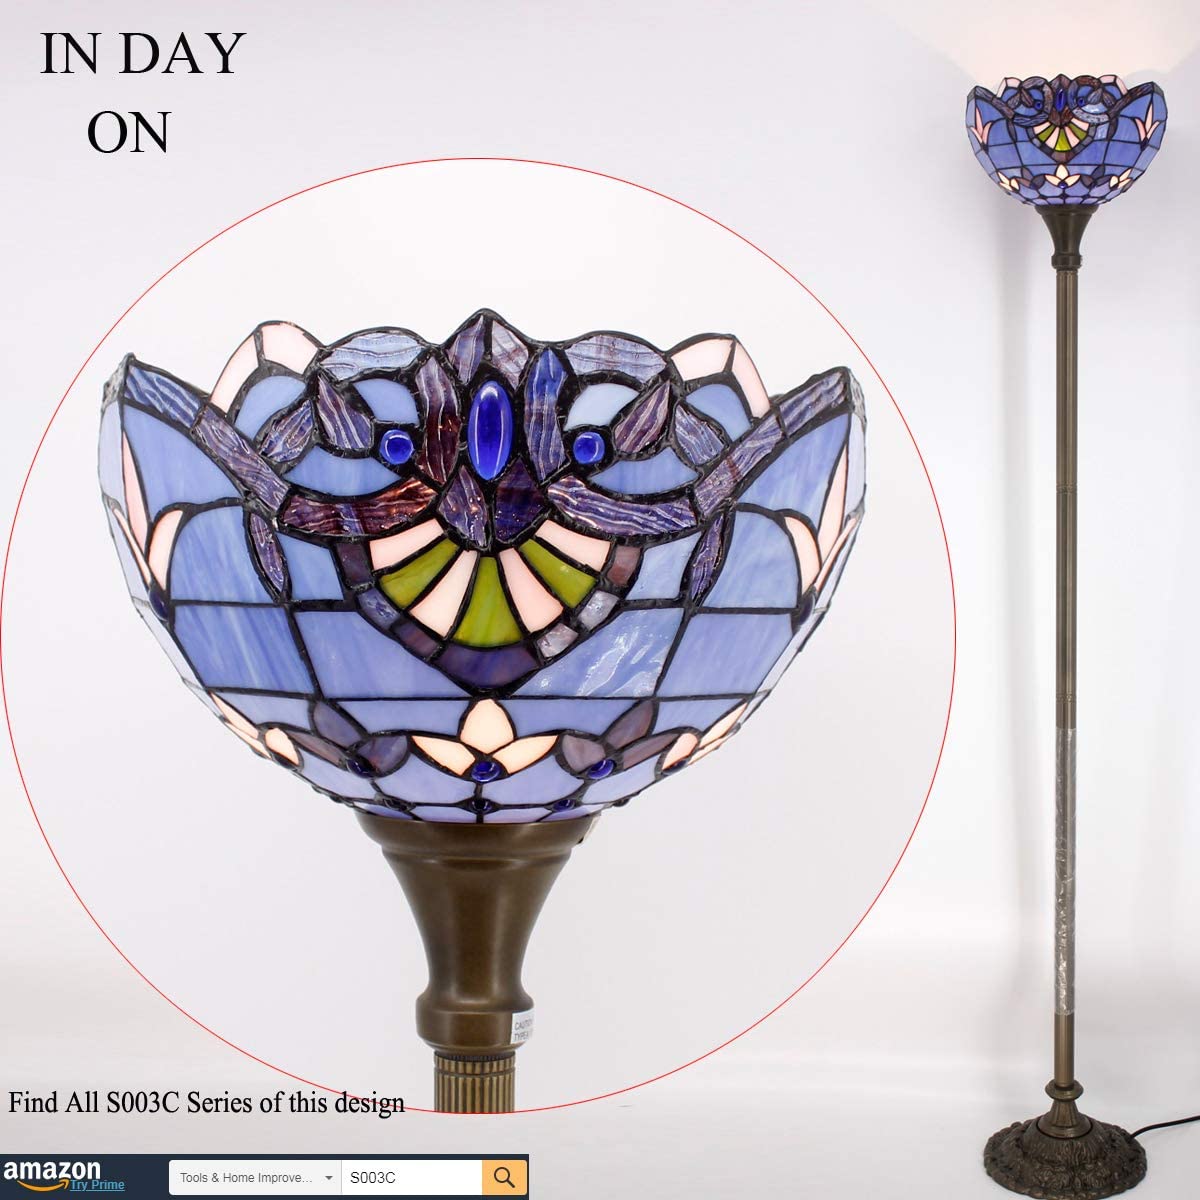 BBNBDMZ  Floor Lamp Blue Purple Baroque Stained Glass Light 12X12X66 Inch Pole Torchiere Standing Corner Torch Uplight Decor Bedroom Living Room  Office S003C Series